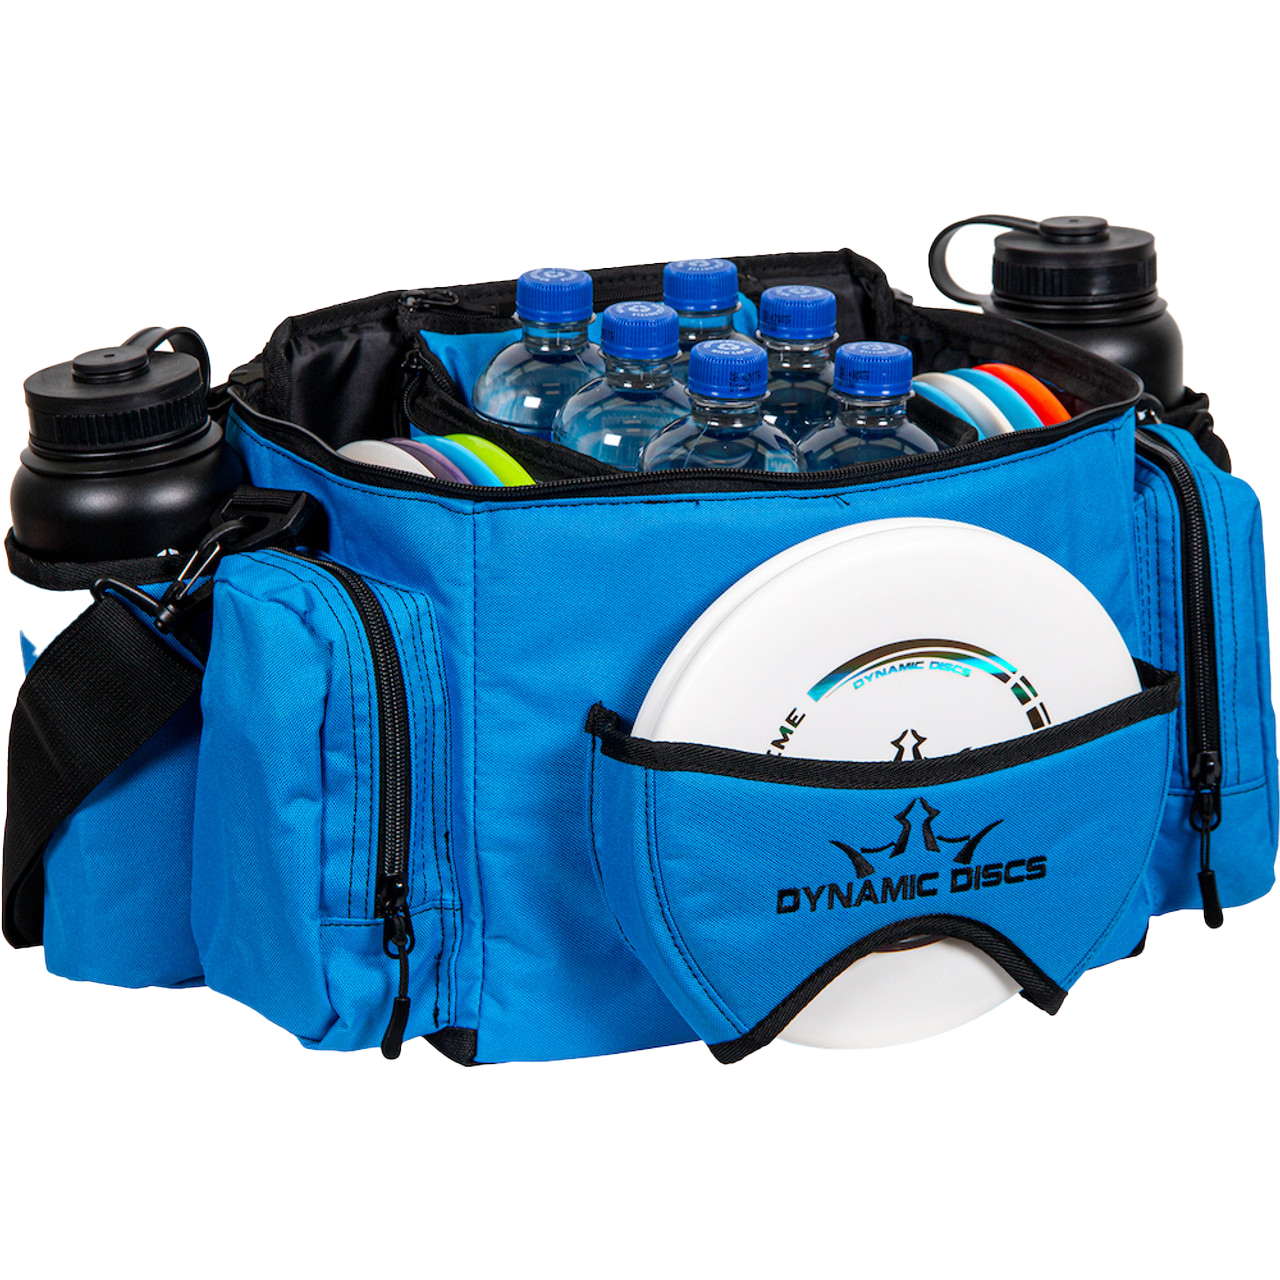 Dynamic Discs Soldier Cooler Disc Golf Duffel Bag | 10 Disc Capacity Featuring A Removable Insulated Cooler Capable of Holding 6 16oz Cans | Adjustable Padded Shoulder Strap Included